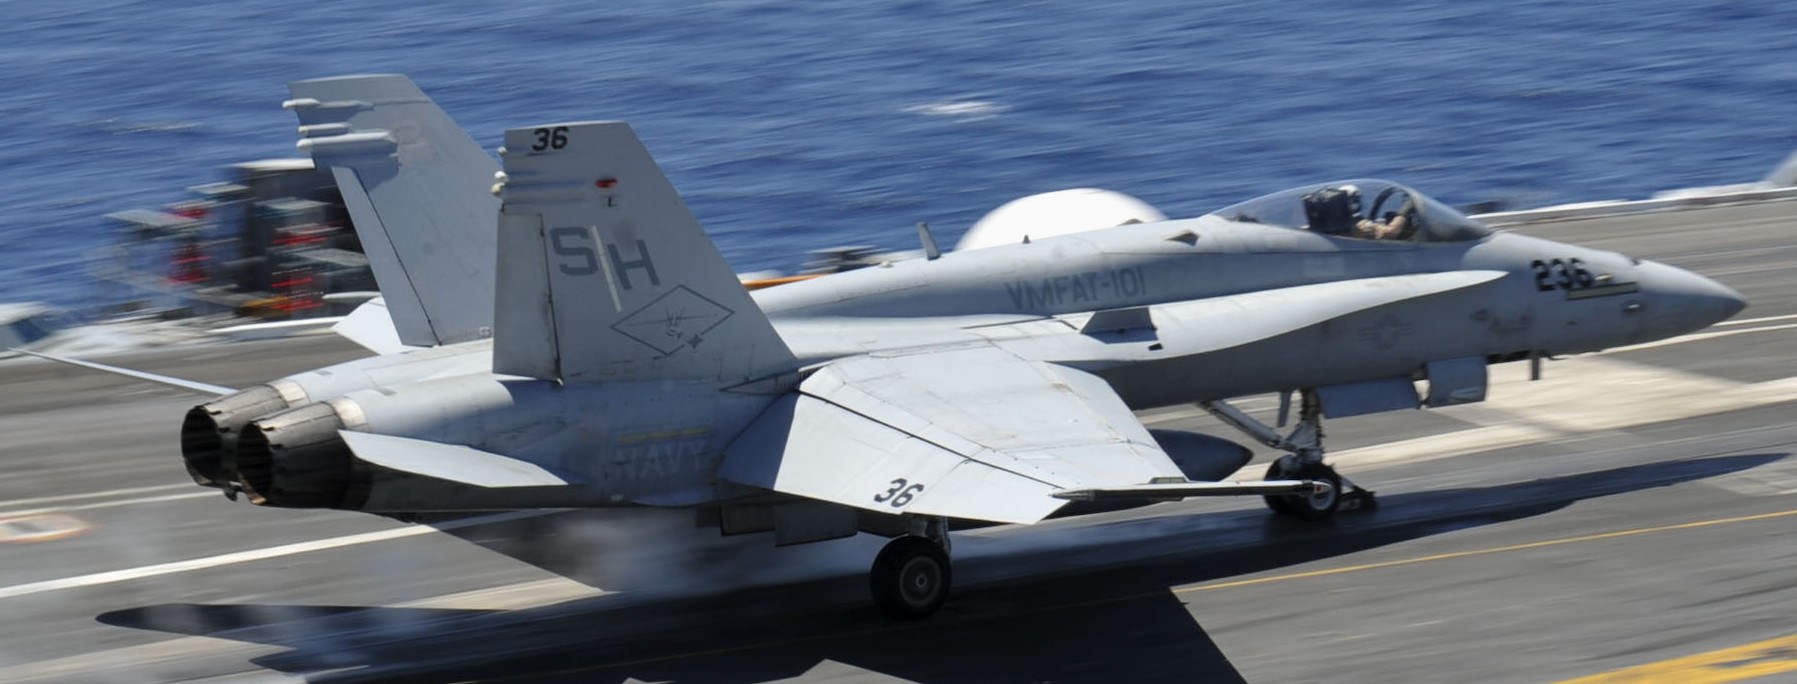 vmfat-101 sharpshooters marine fighter attack training squadron f/a-18c hornet 29